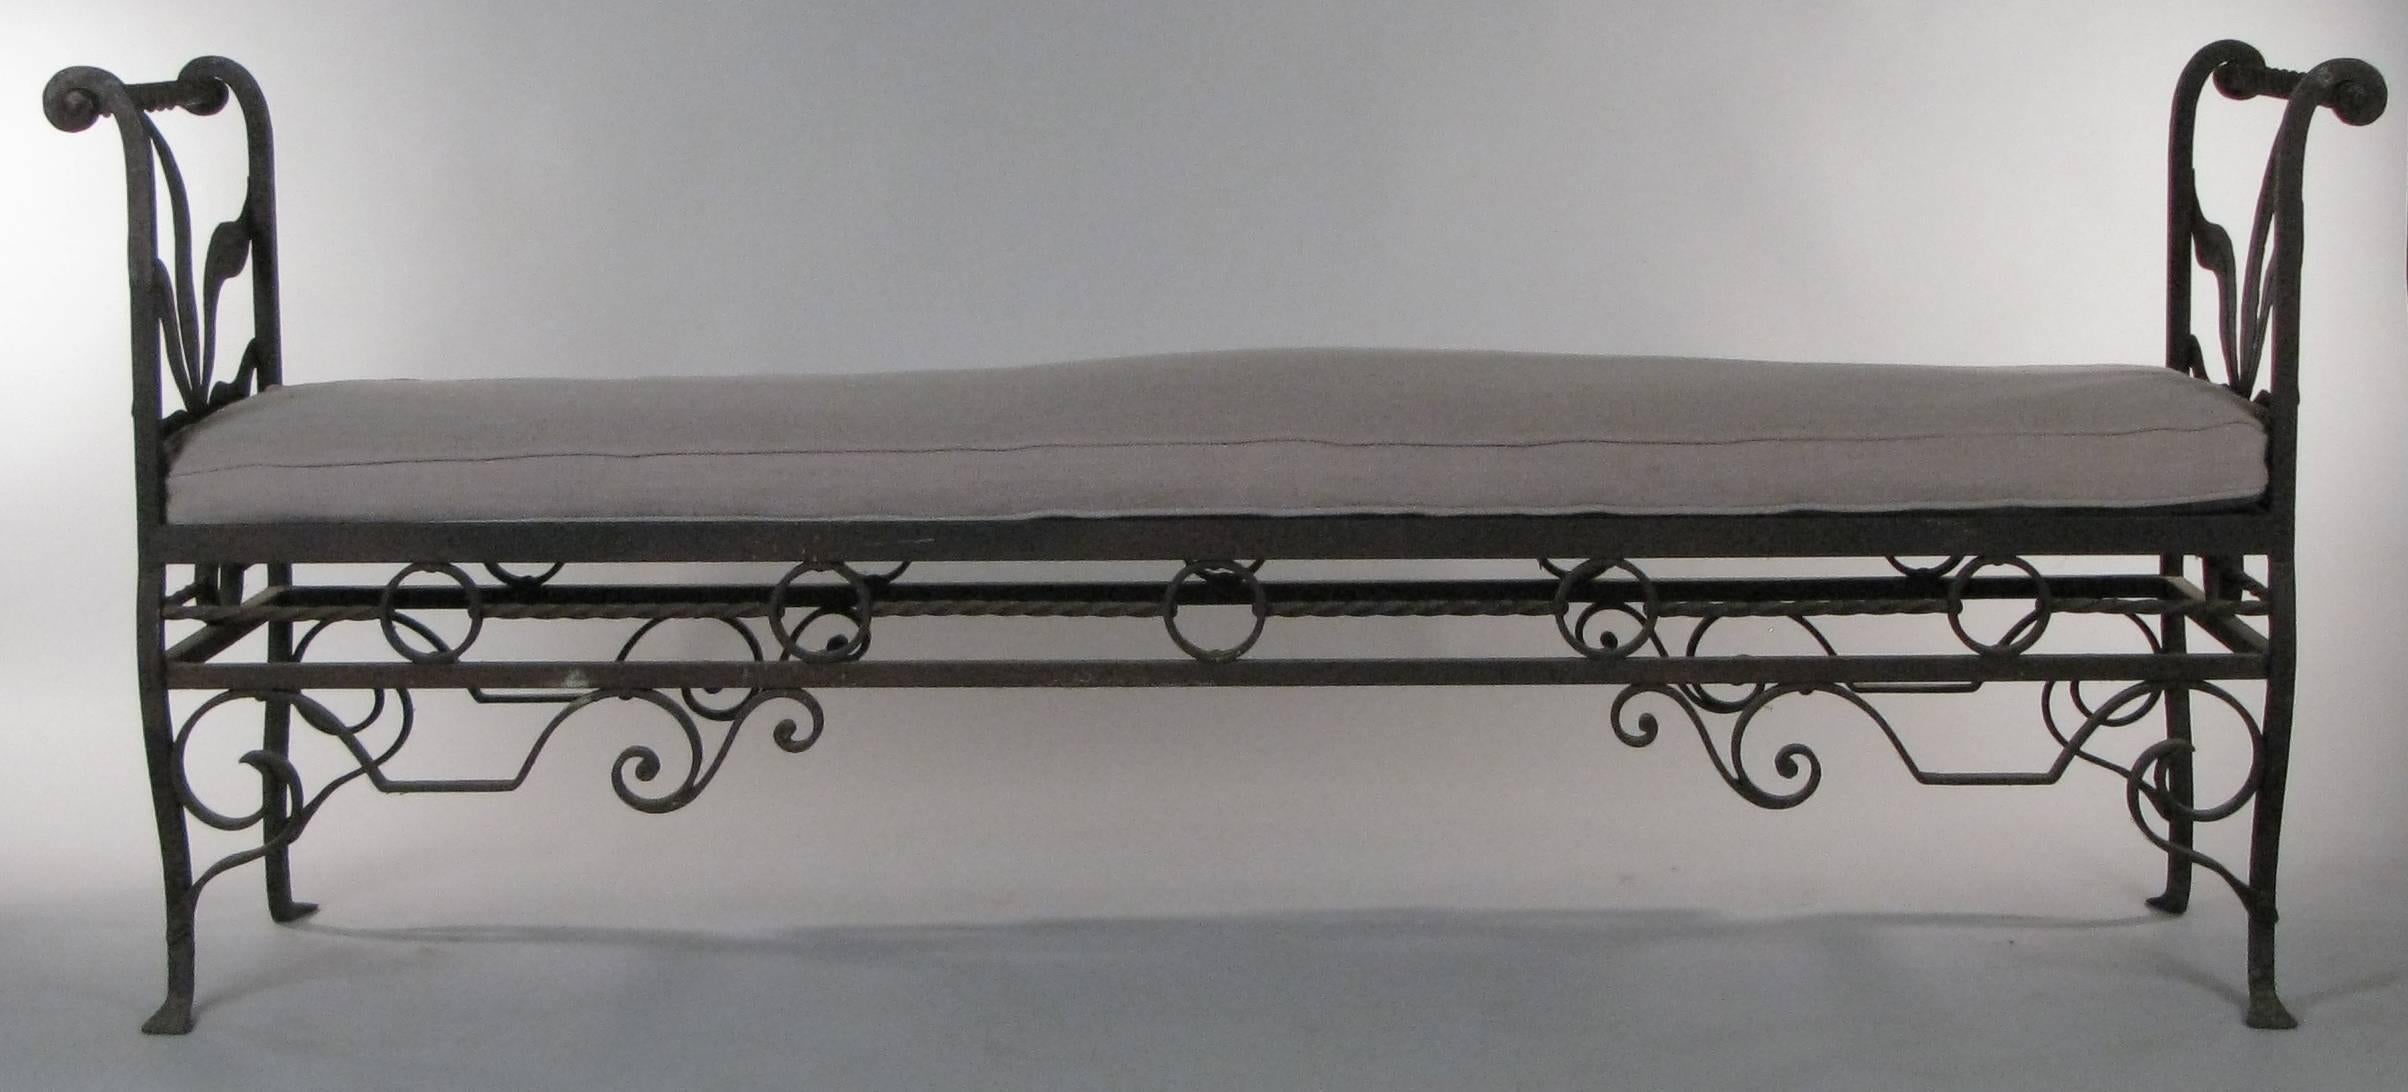 A very well made hand-wrought iron bench, circa 1920, with scroll detail around the base and ends with leaf pattern. Furnished with linen seat cushion.